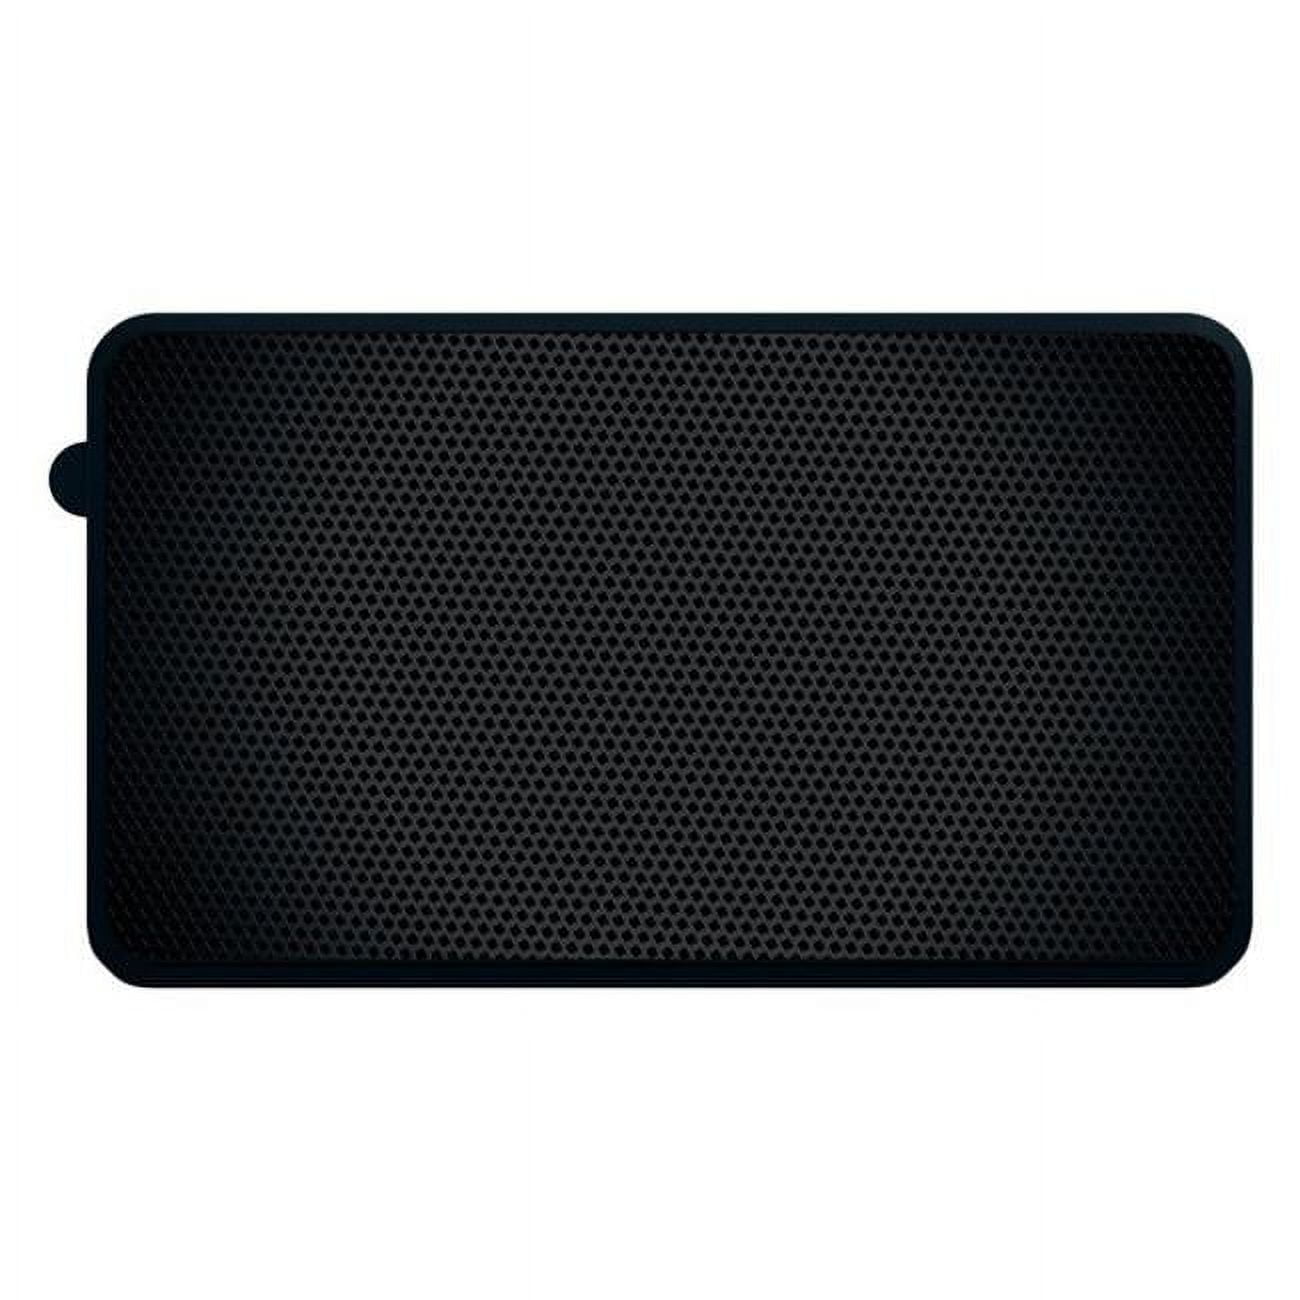 Picture of Emtec ECSSD128GX600 X600 External 128 GB Solid State Drive